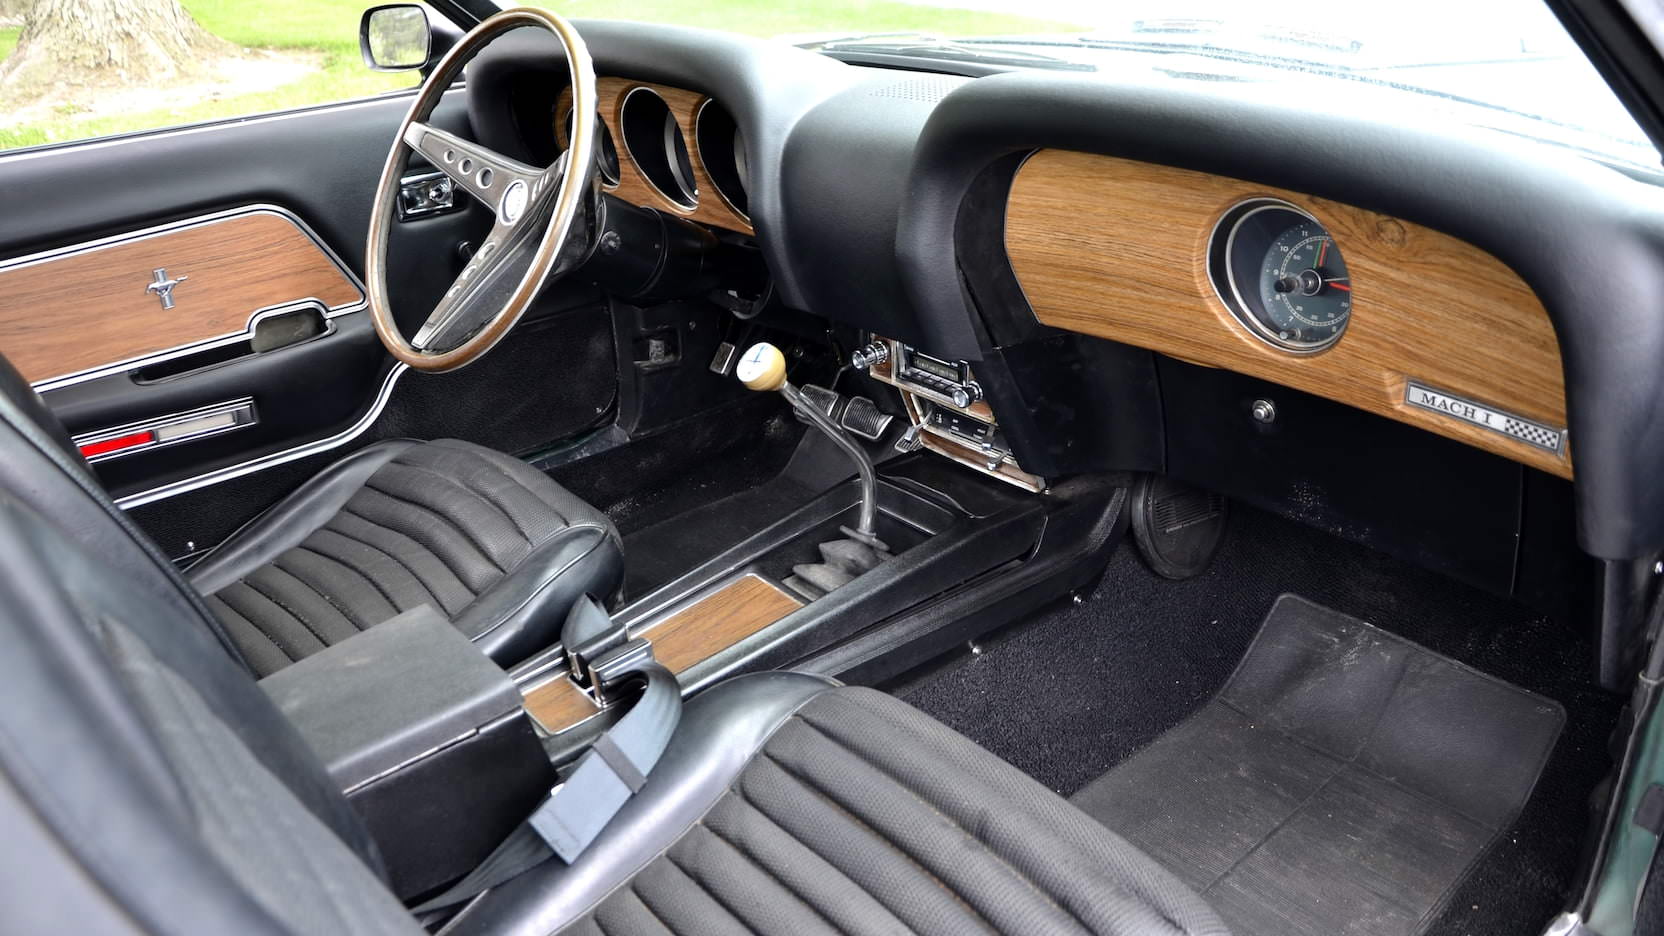 1969 Mustang Coupe Interior